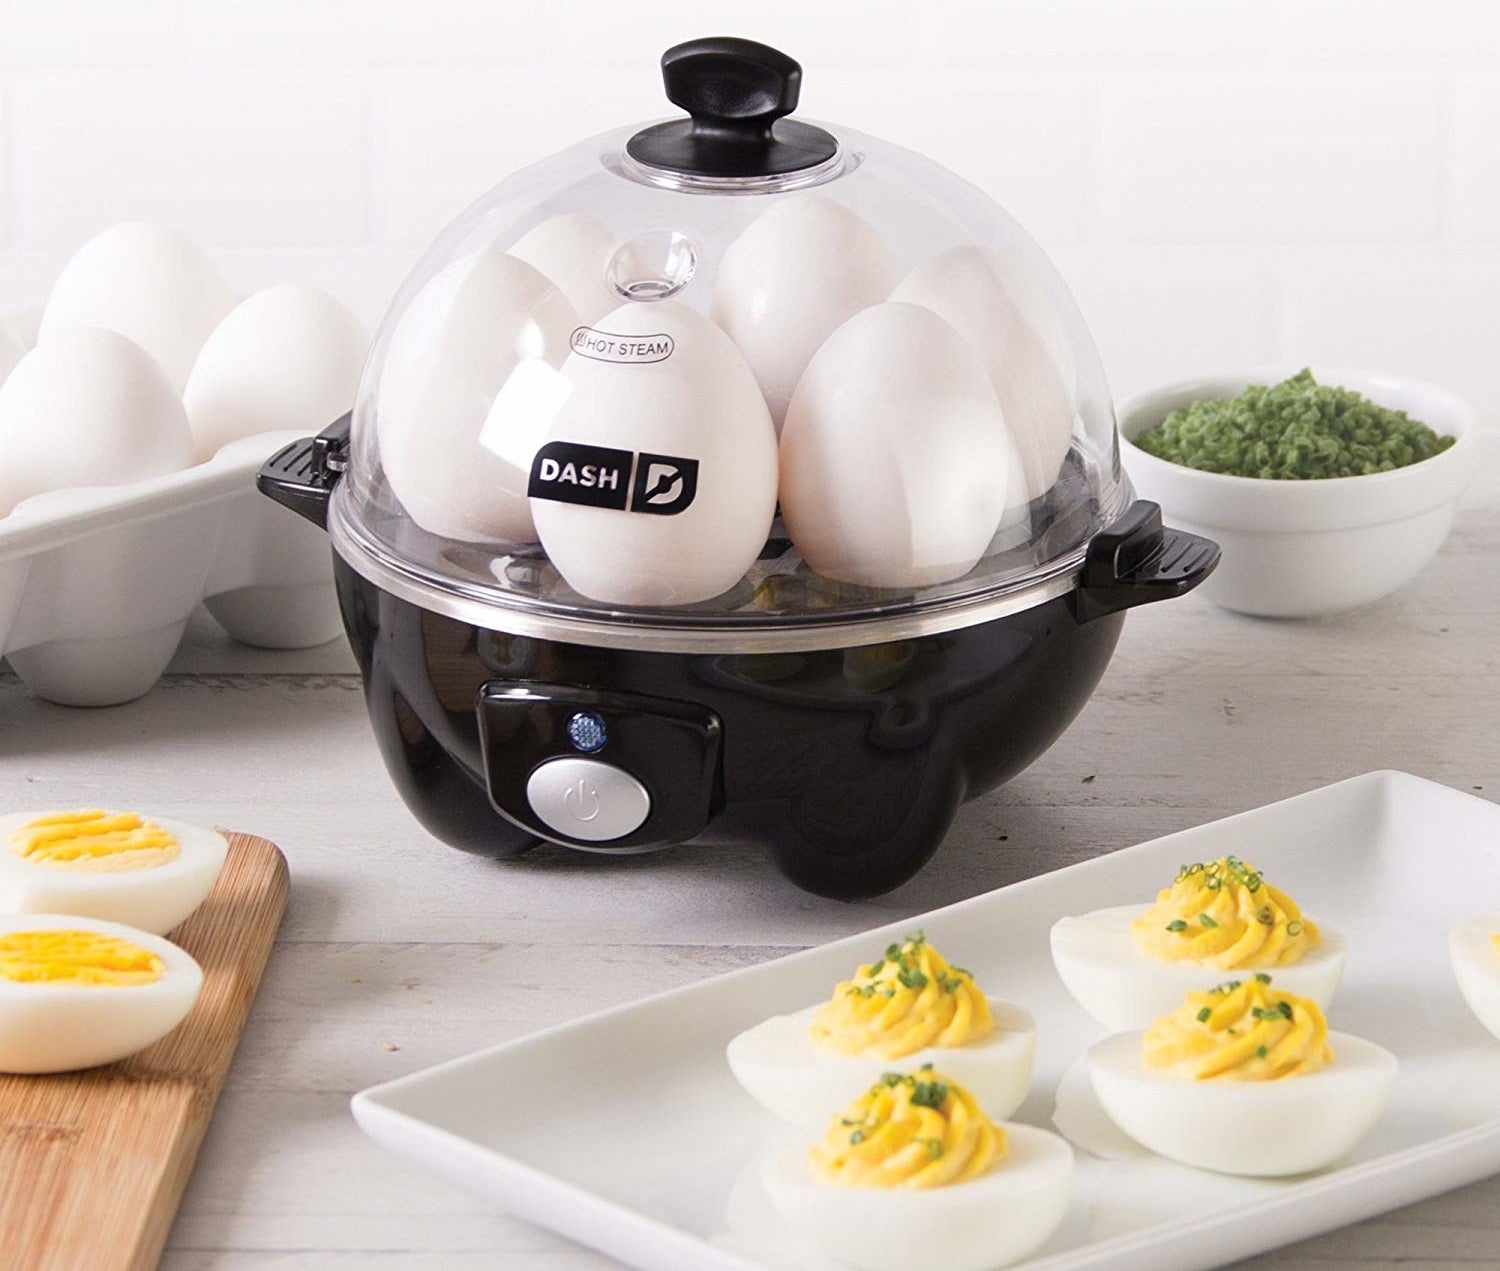 The black egg cooker with six eggs, plus a tray of deviled eggs